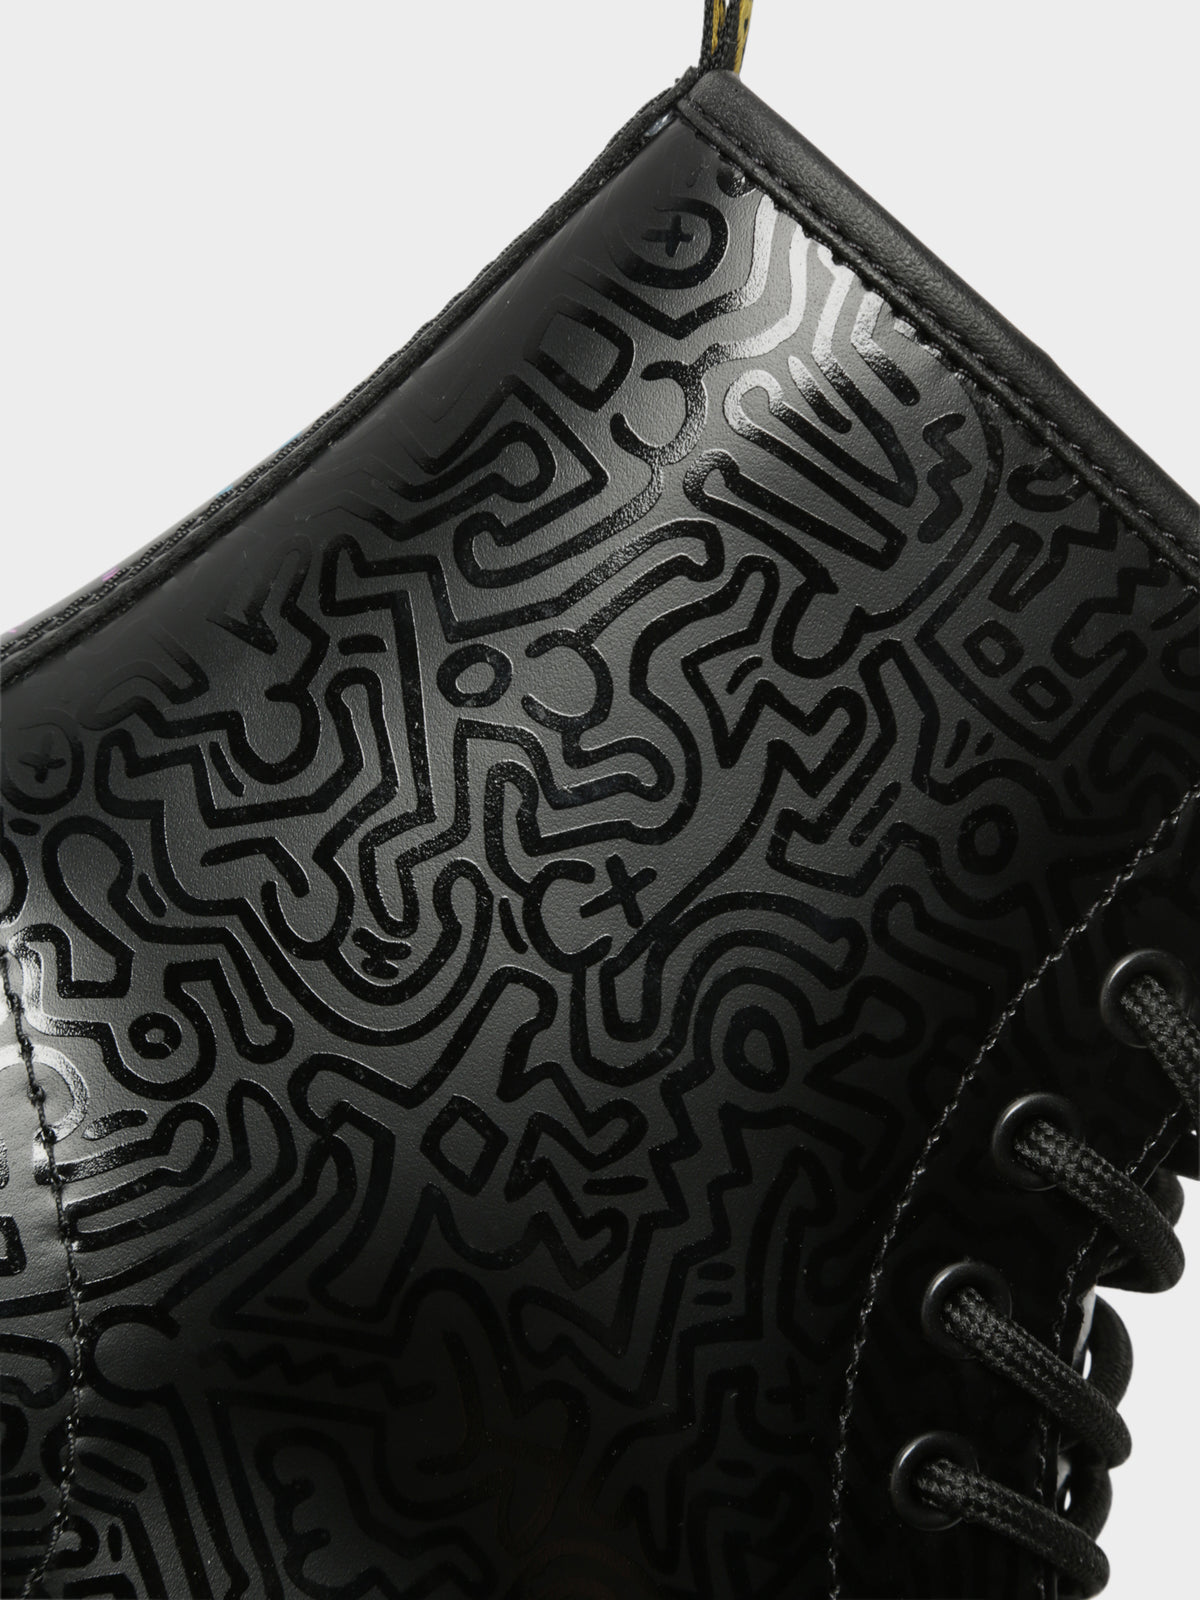 Unisex 1460 Keith Haring Boots in Black